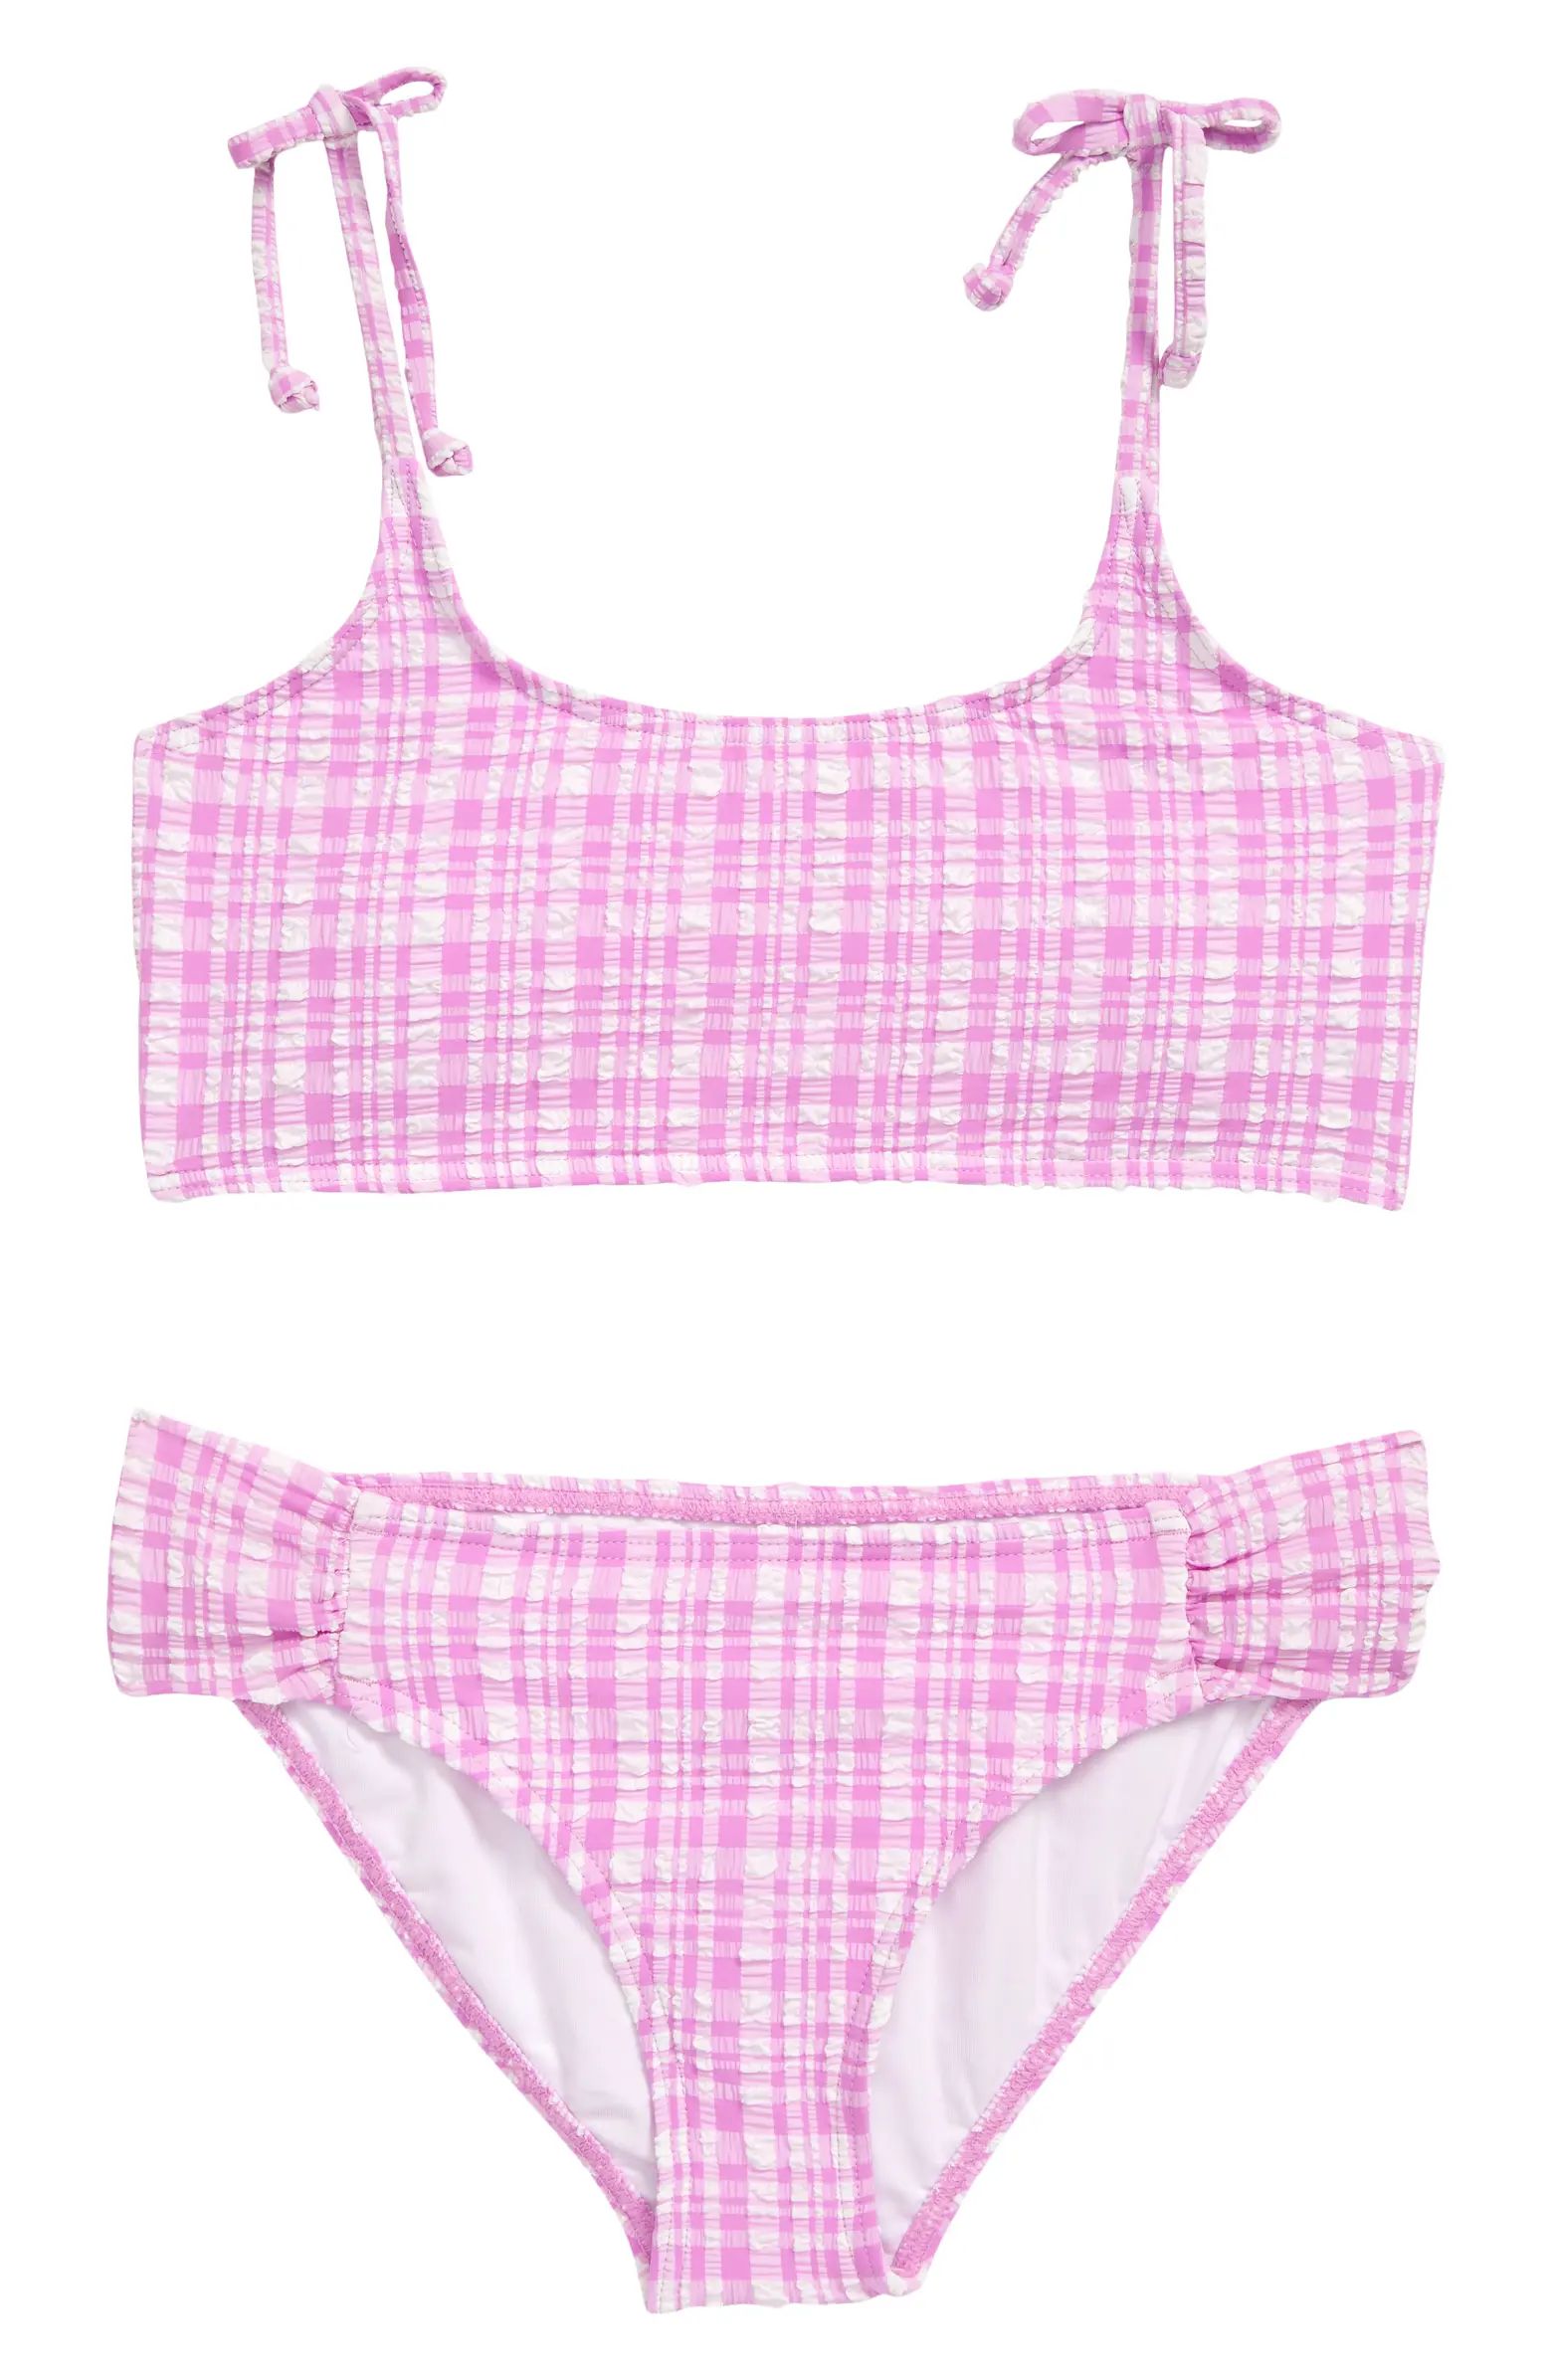 Kids' Checkin' the Waves Two-Piece Swimsuit | Nordstrom